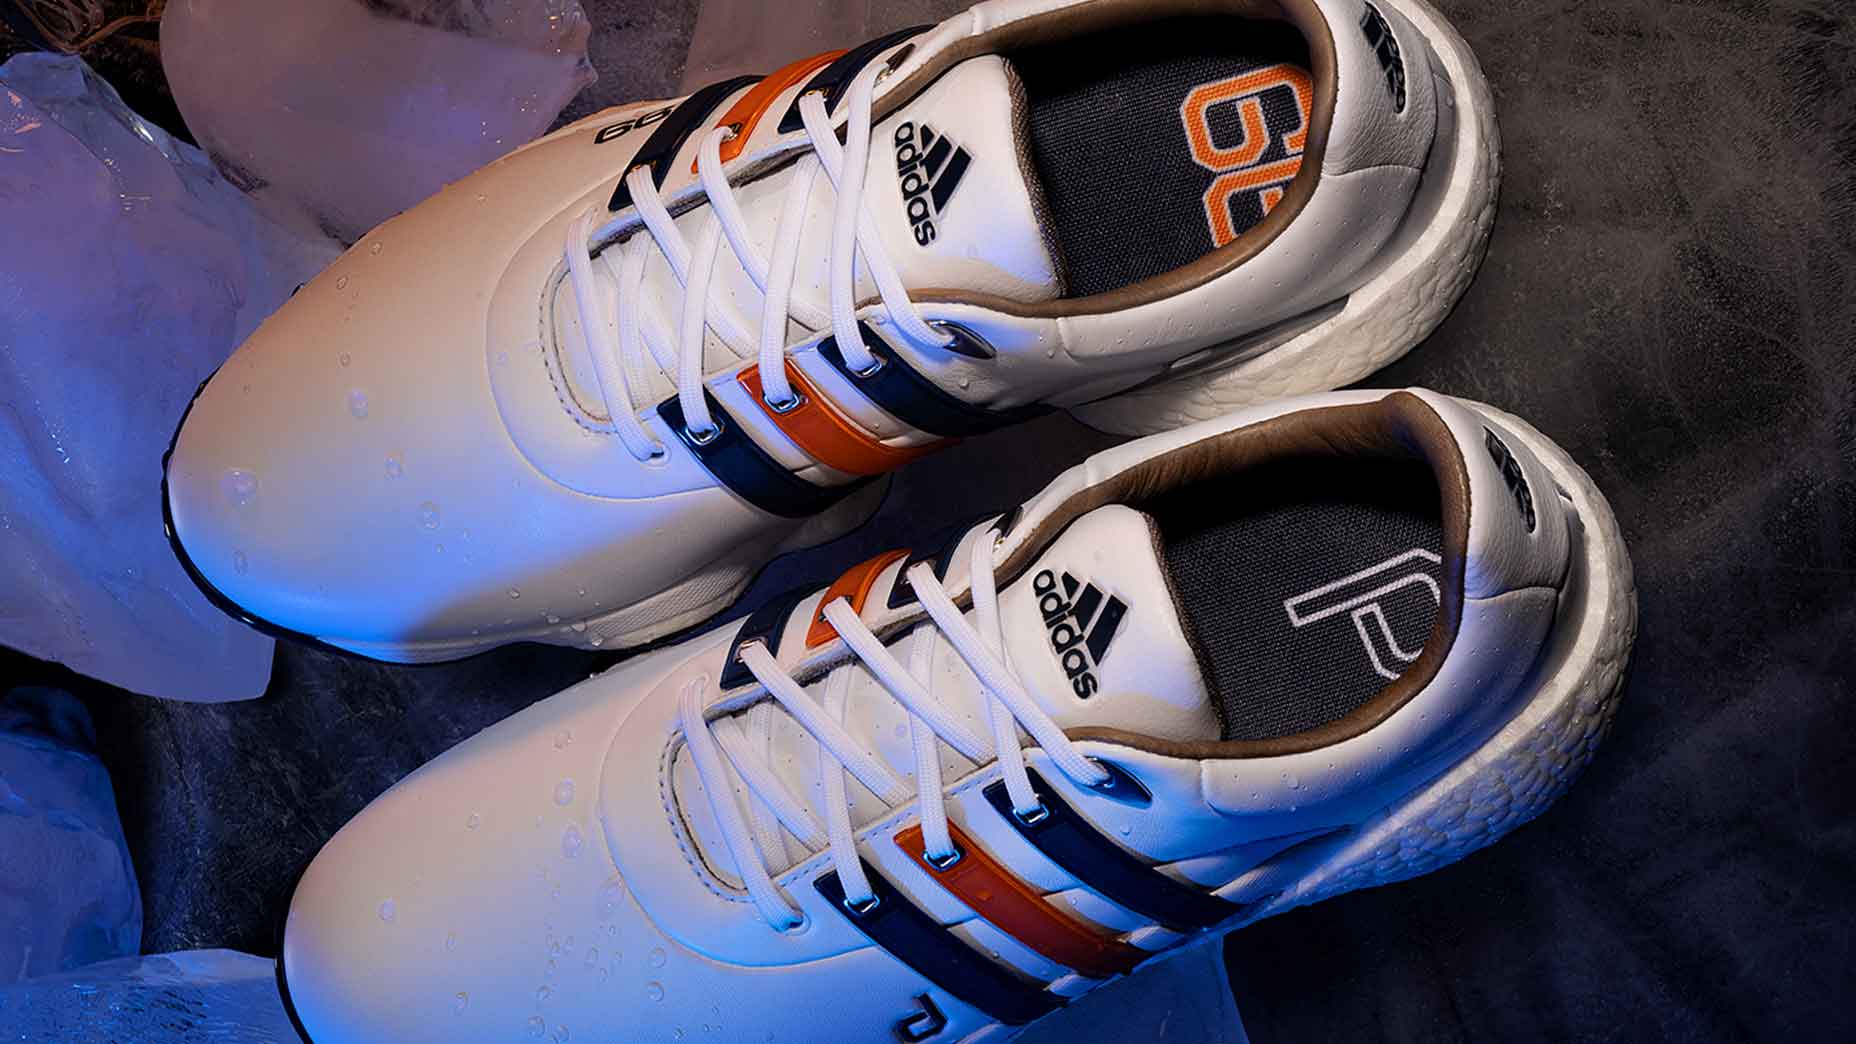 gretzky shoes 3